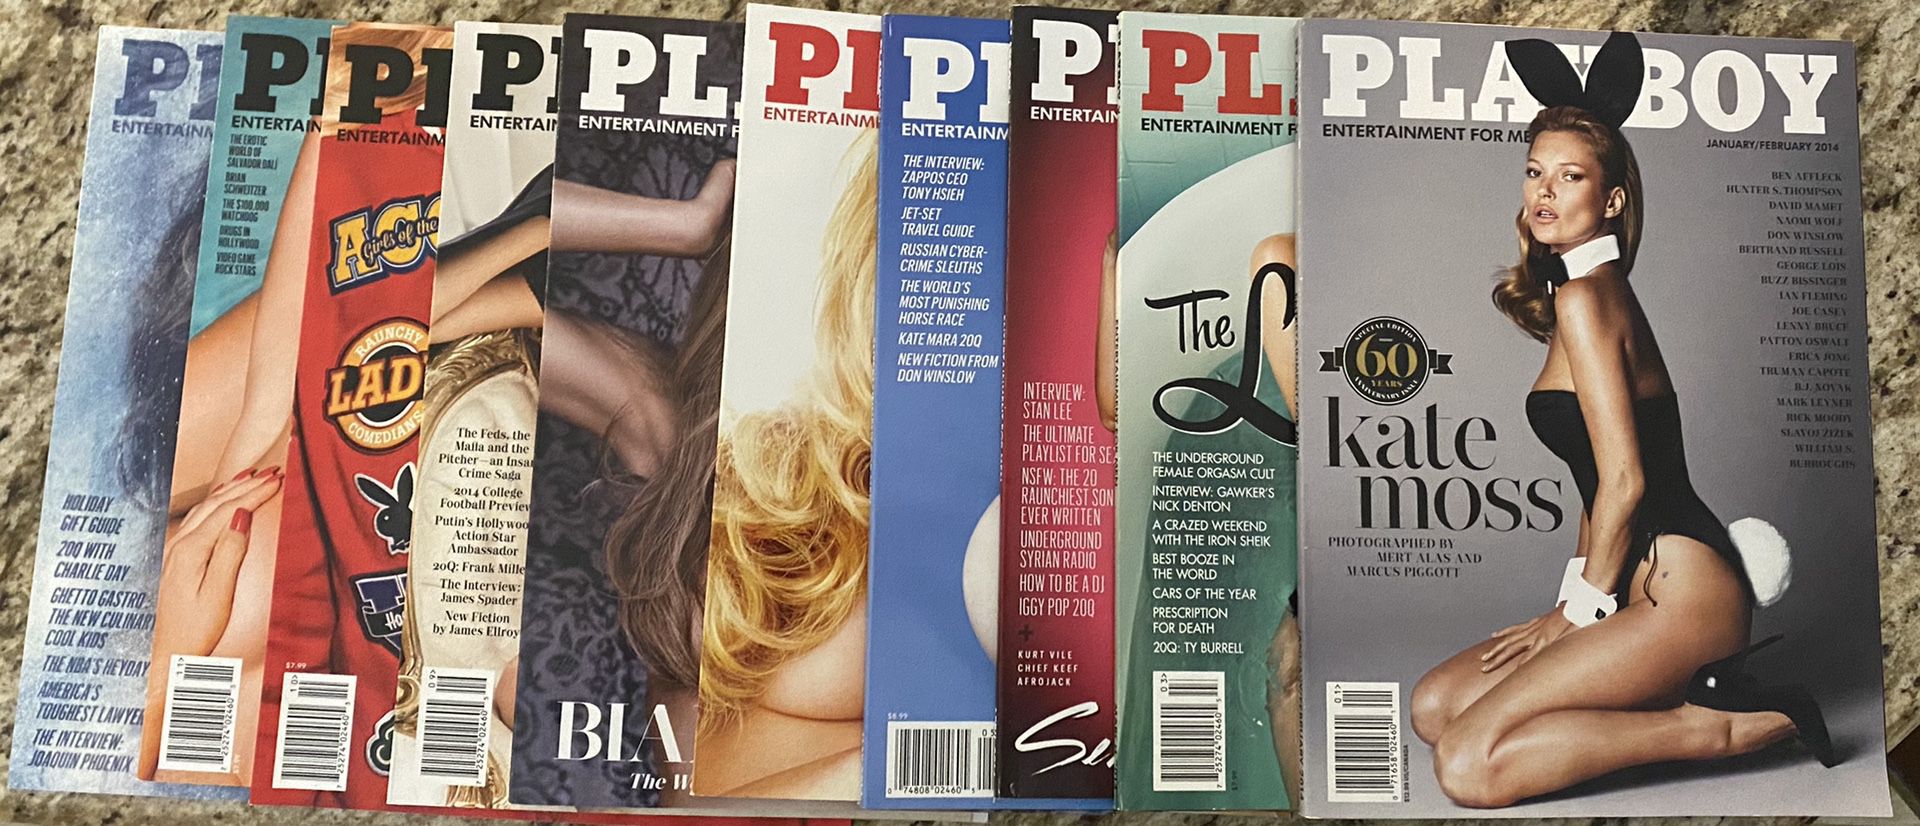 Playboy magazines (2014) Covers/Centerfold intact